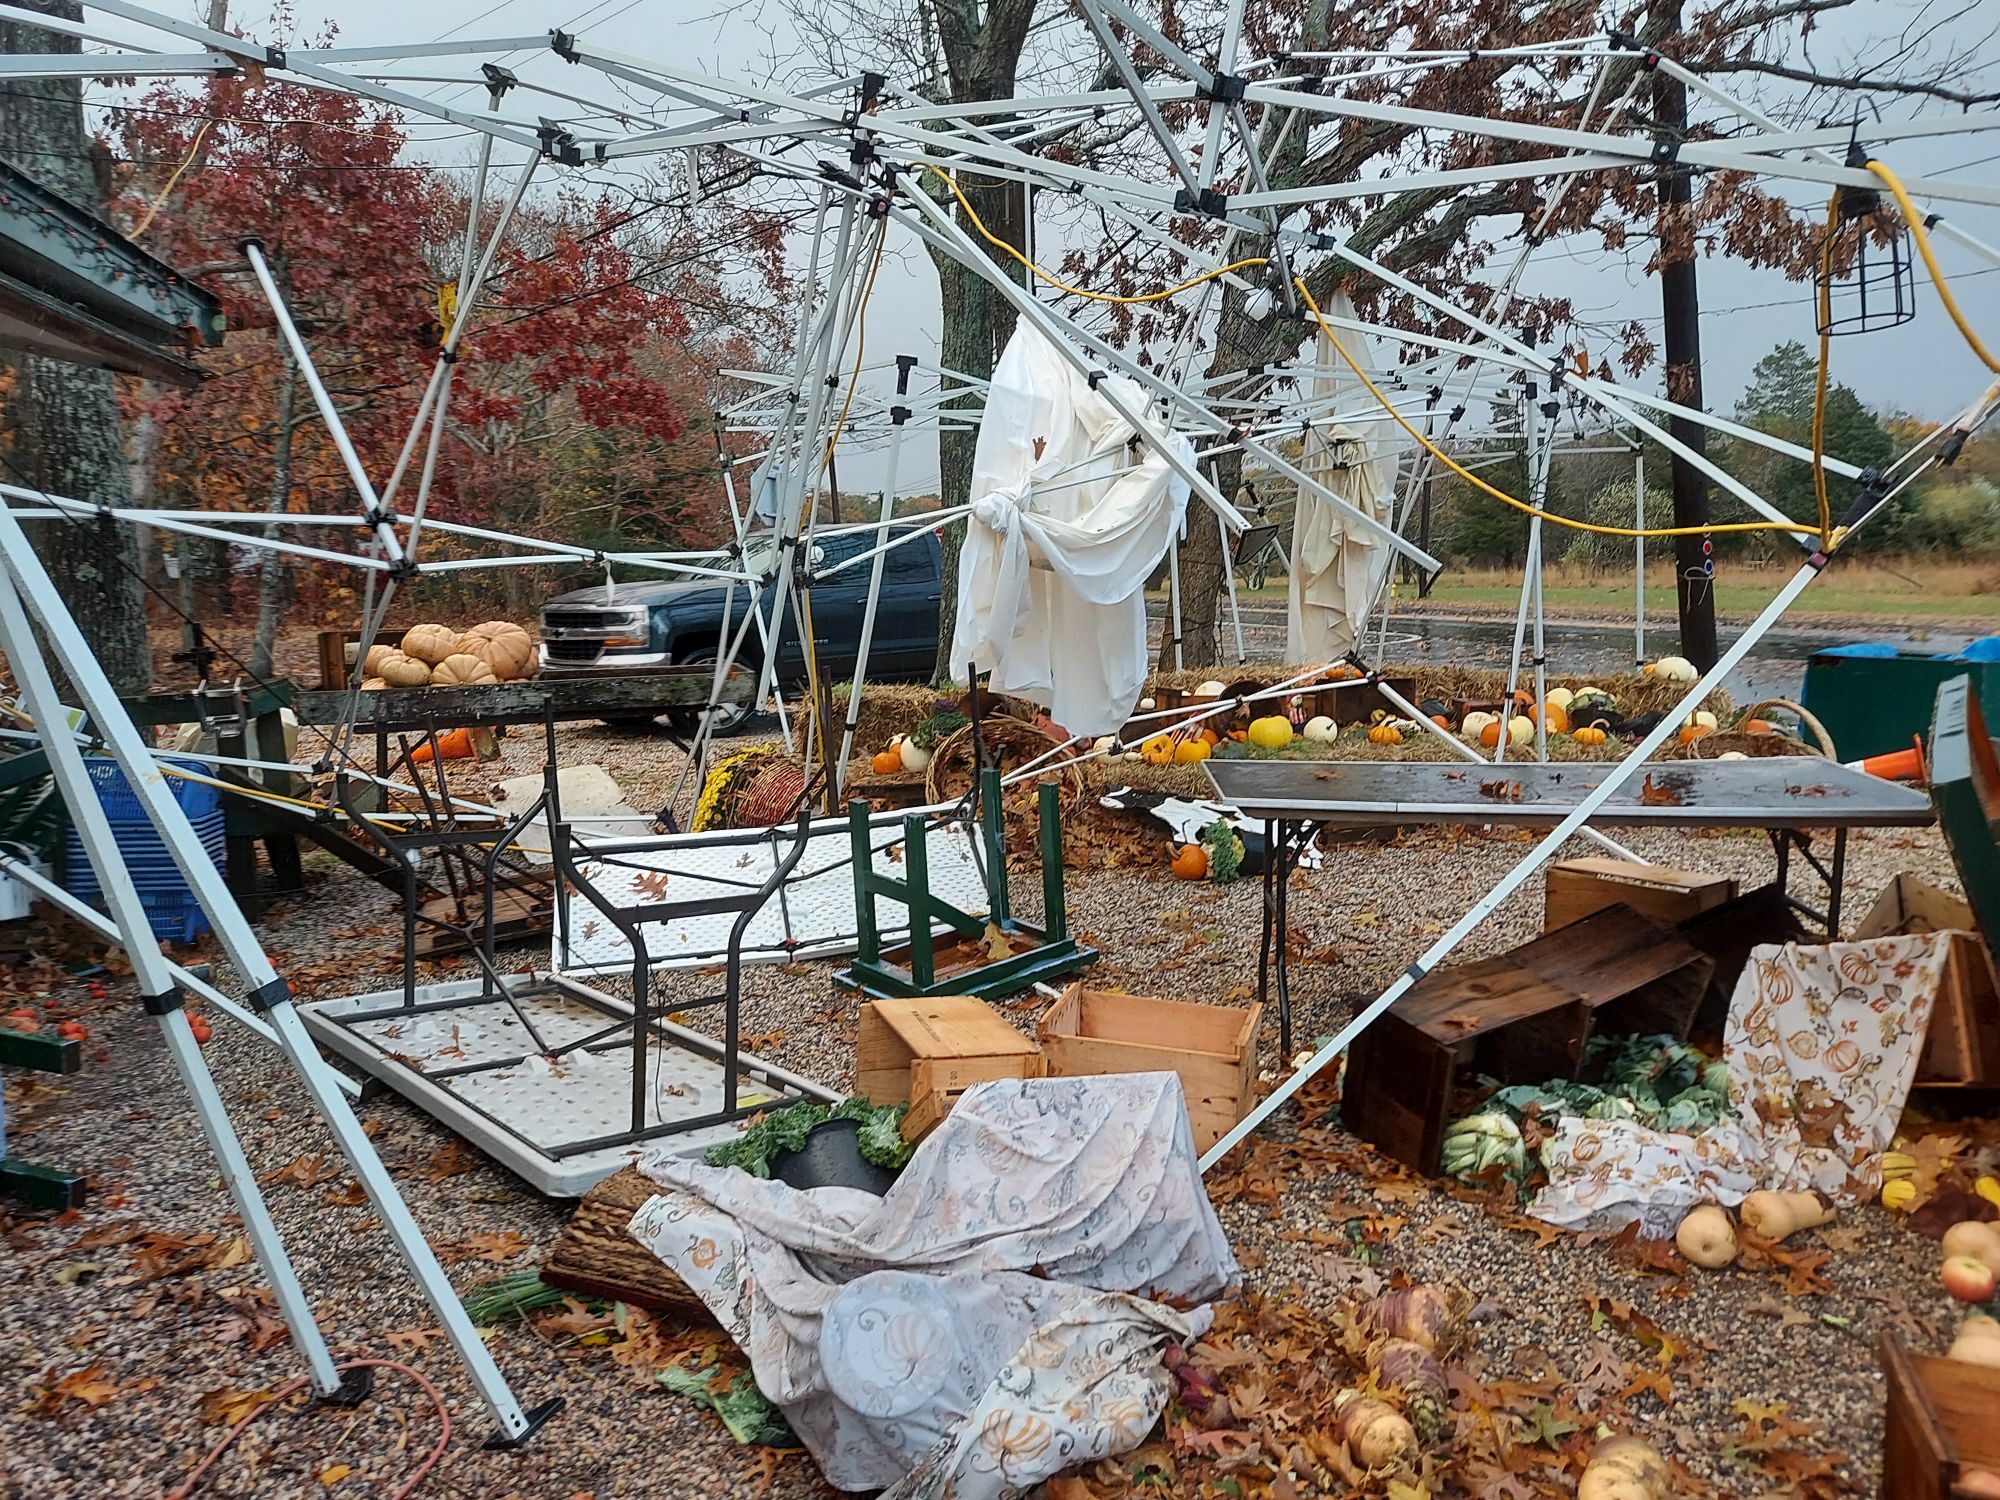 Aftermath from Saturday's storm at the Farmers Market Farm Stand in Westhampton.